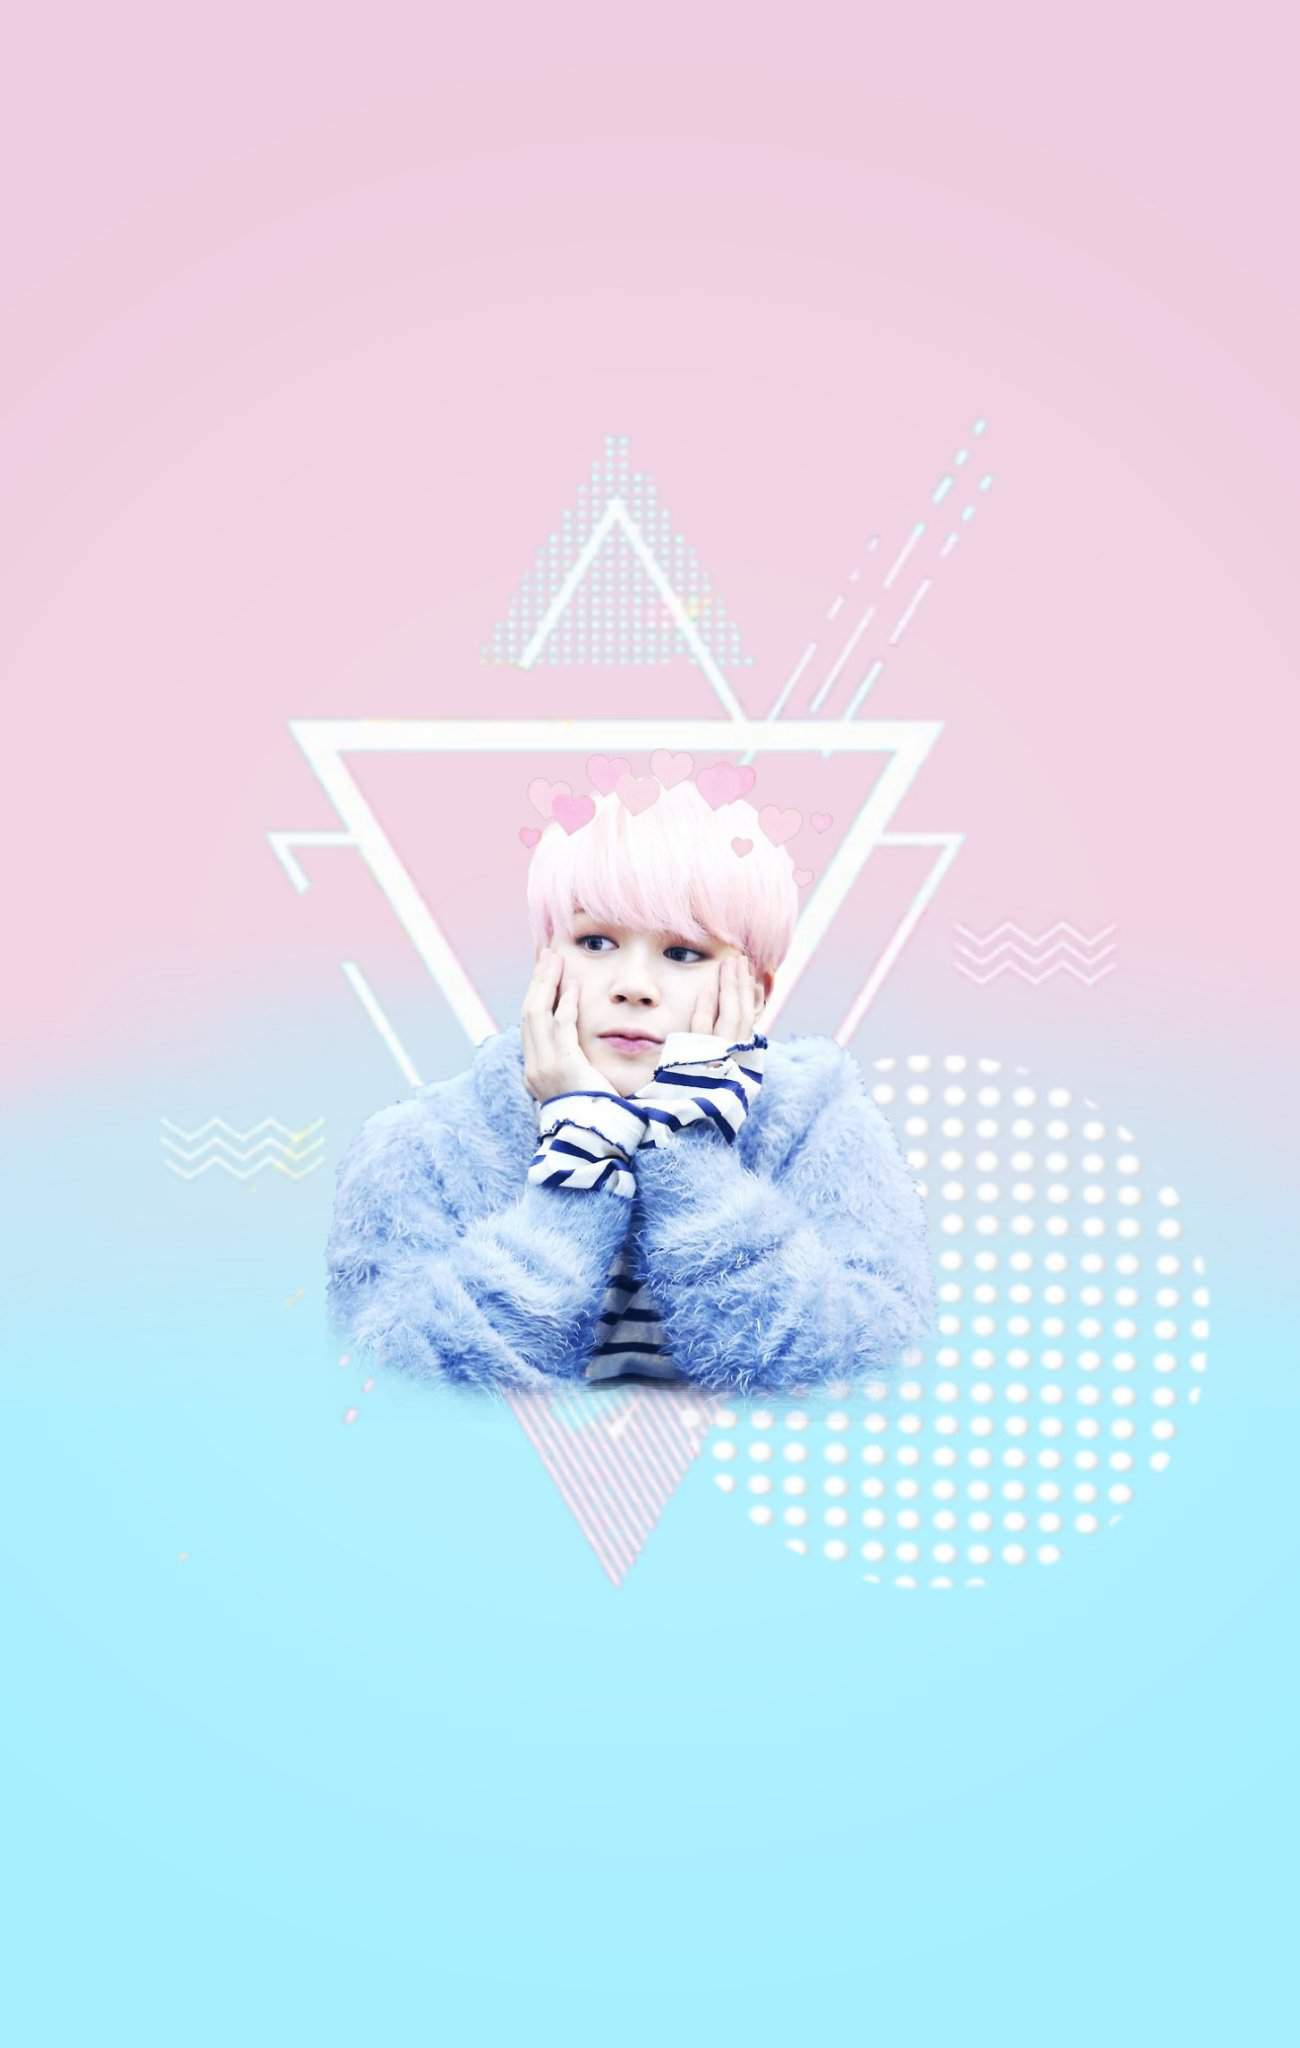 Jimin Aesthetic and cute Background!. ARMY's Amino